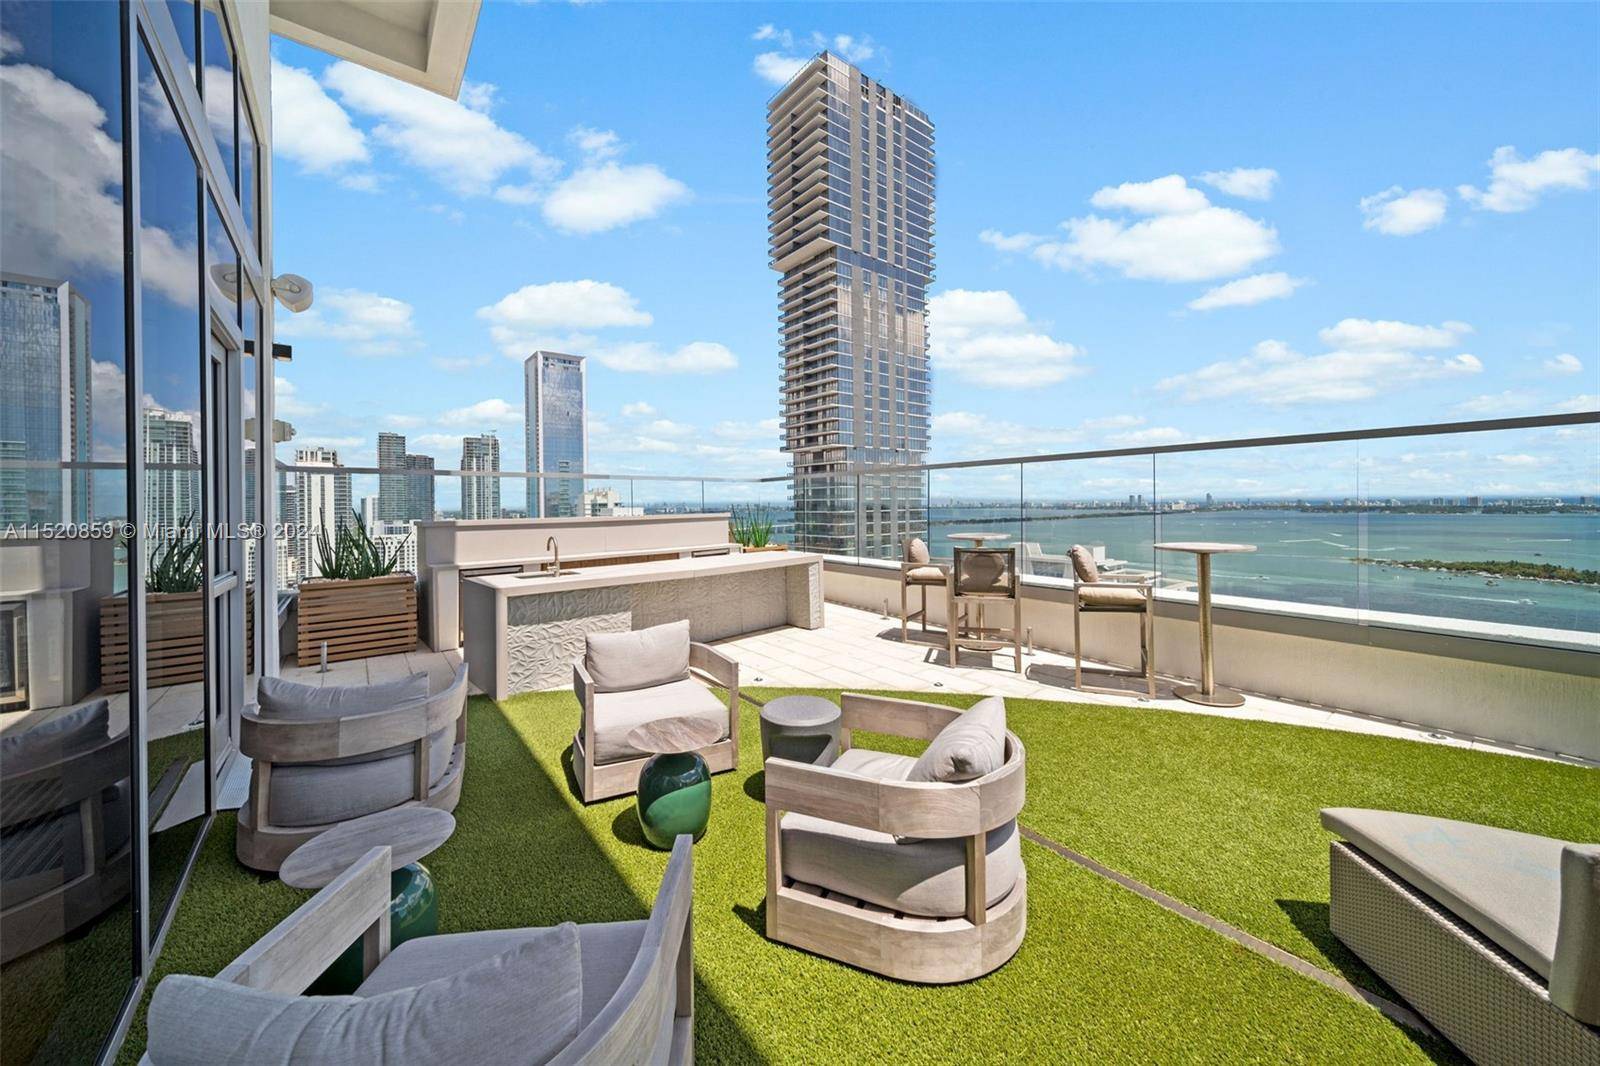 AVAILABLE 01 21. The Watermarc at Biscayne Bay Brand New Luxury Apartments Centrally Located in Downtown Miami's Edgewater neighborhood.